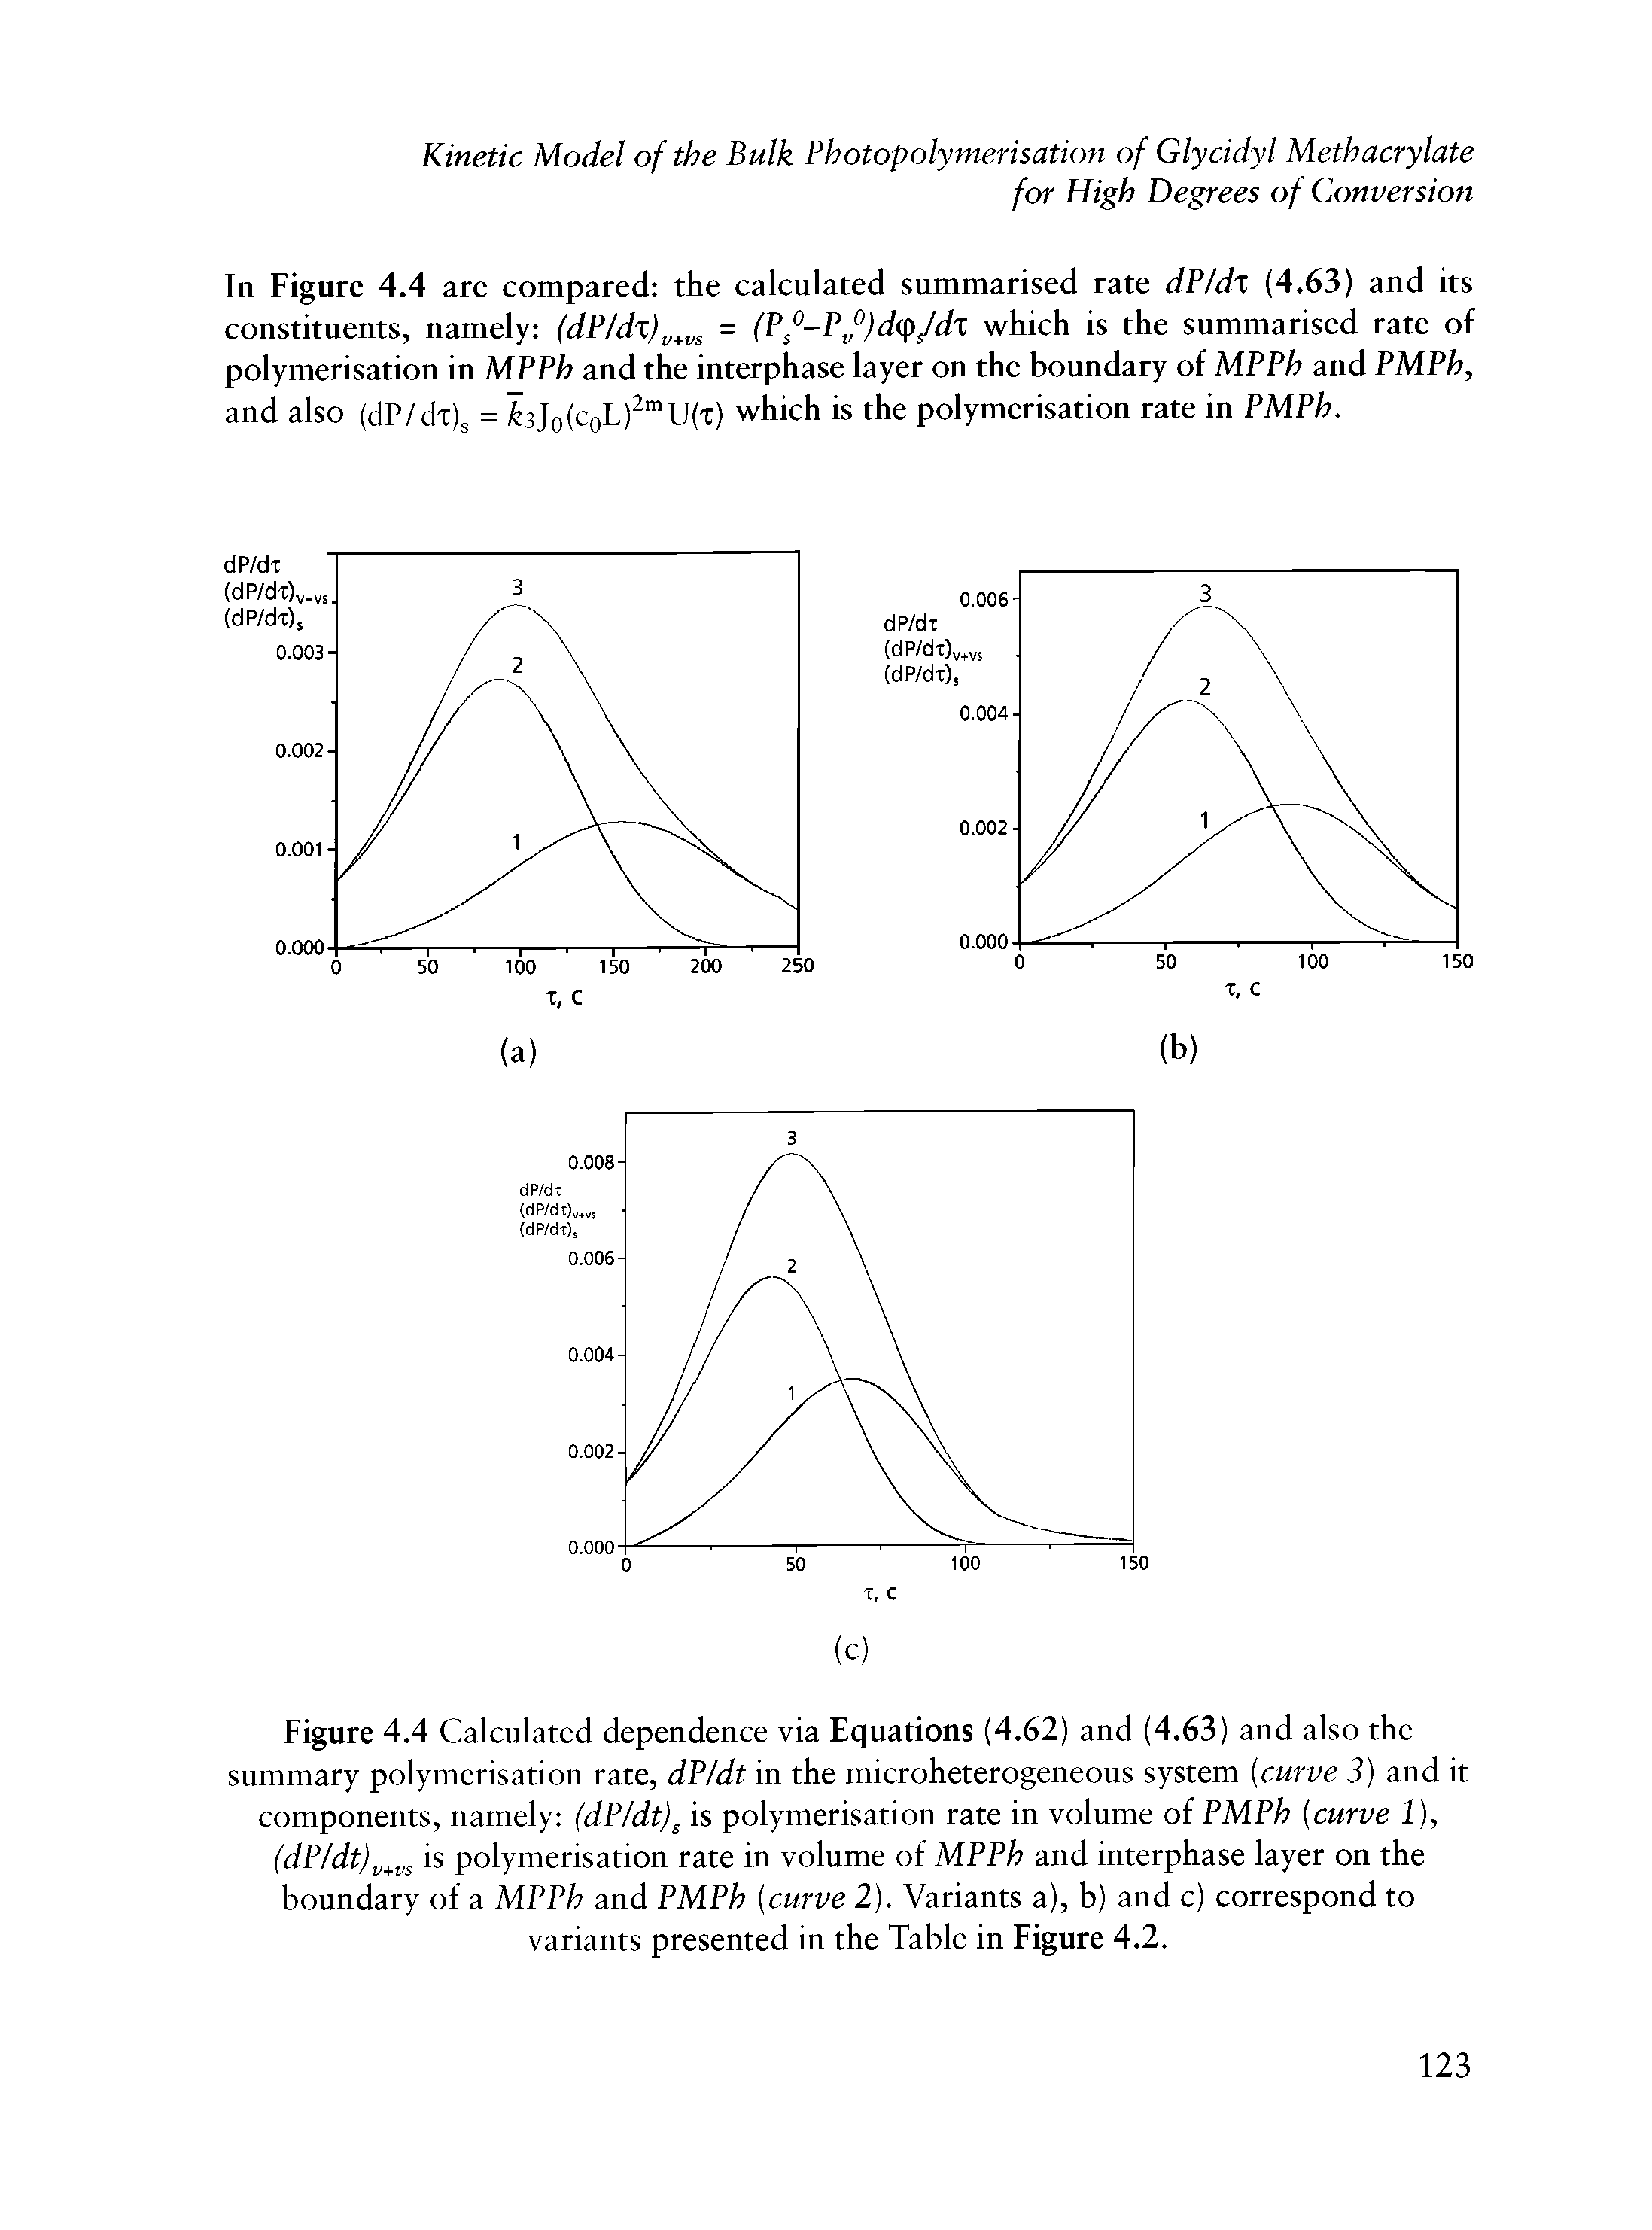 Figure 4.4 Calculated dependence via Equations (4.62) and (4.63) and also the summary polymerisation rate, dP/dt in the microheterogeneous system curve 3) and it components, namely (dP/dt) is polymerisation rate in volume of PMPh curve 1), is polymerisation rate in volume of MPPh and interphase layer on the boundary of a MPPh and PMPh curve 2). Variants a), b) and c) correspond to variants presented in the Table in Figure 4.2.